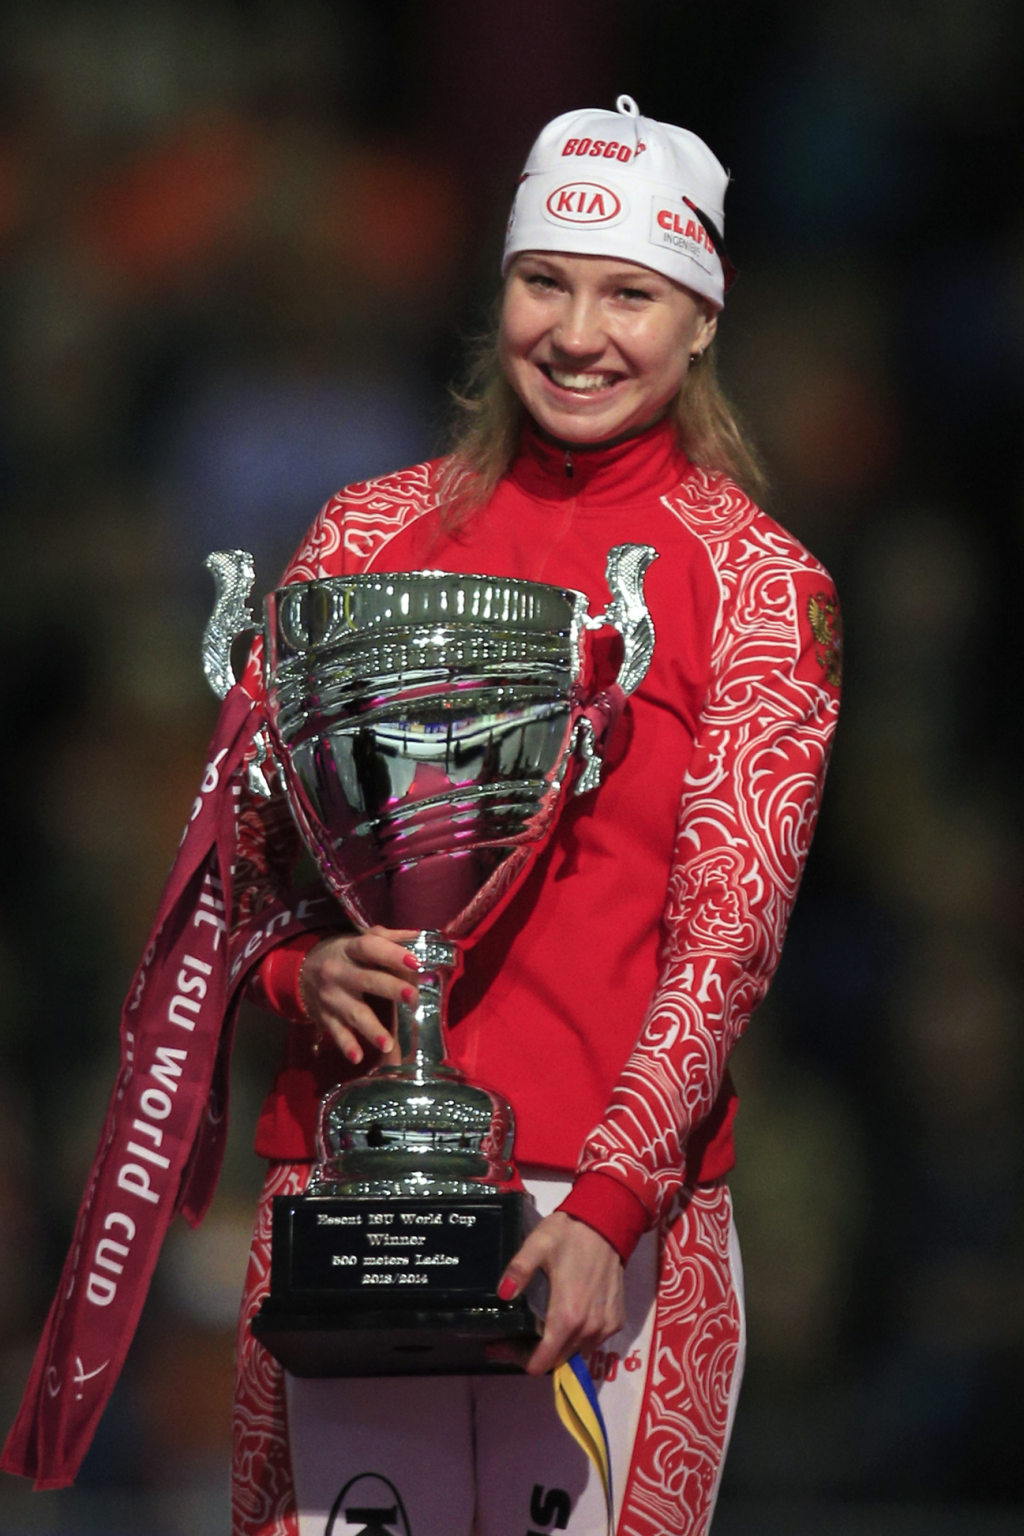 World Cup winner Russia's Olga Fatkulina holds the trophy фото (photo)